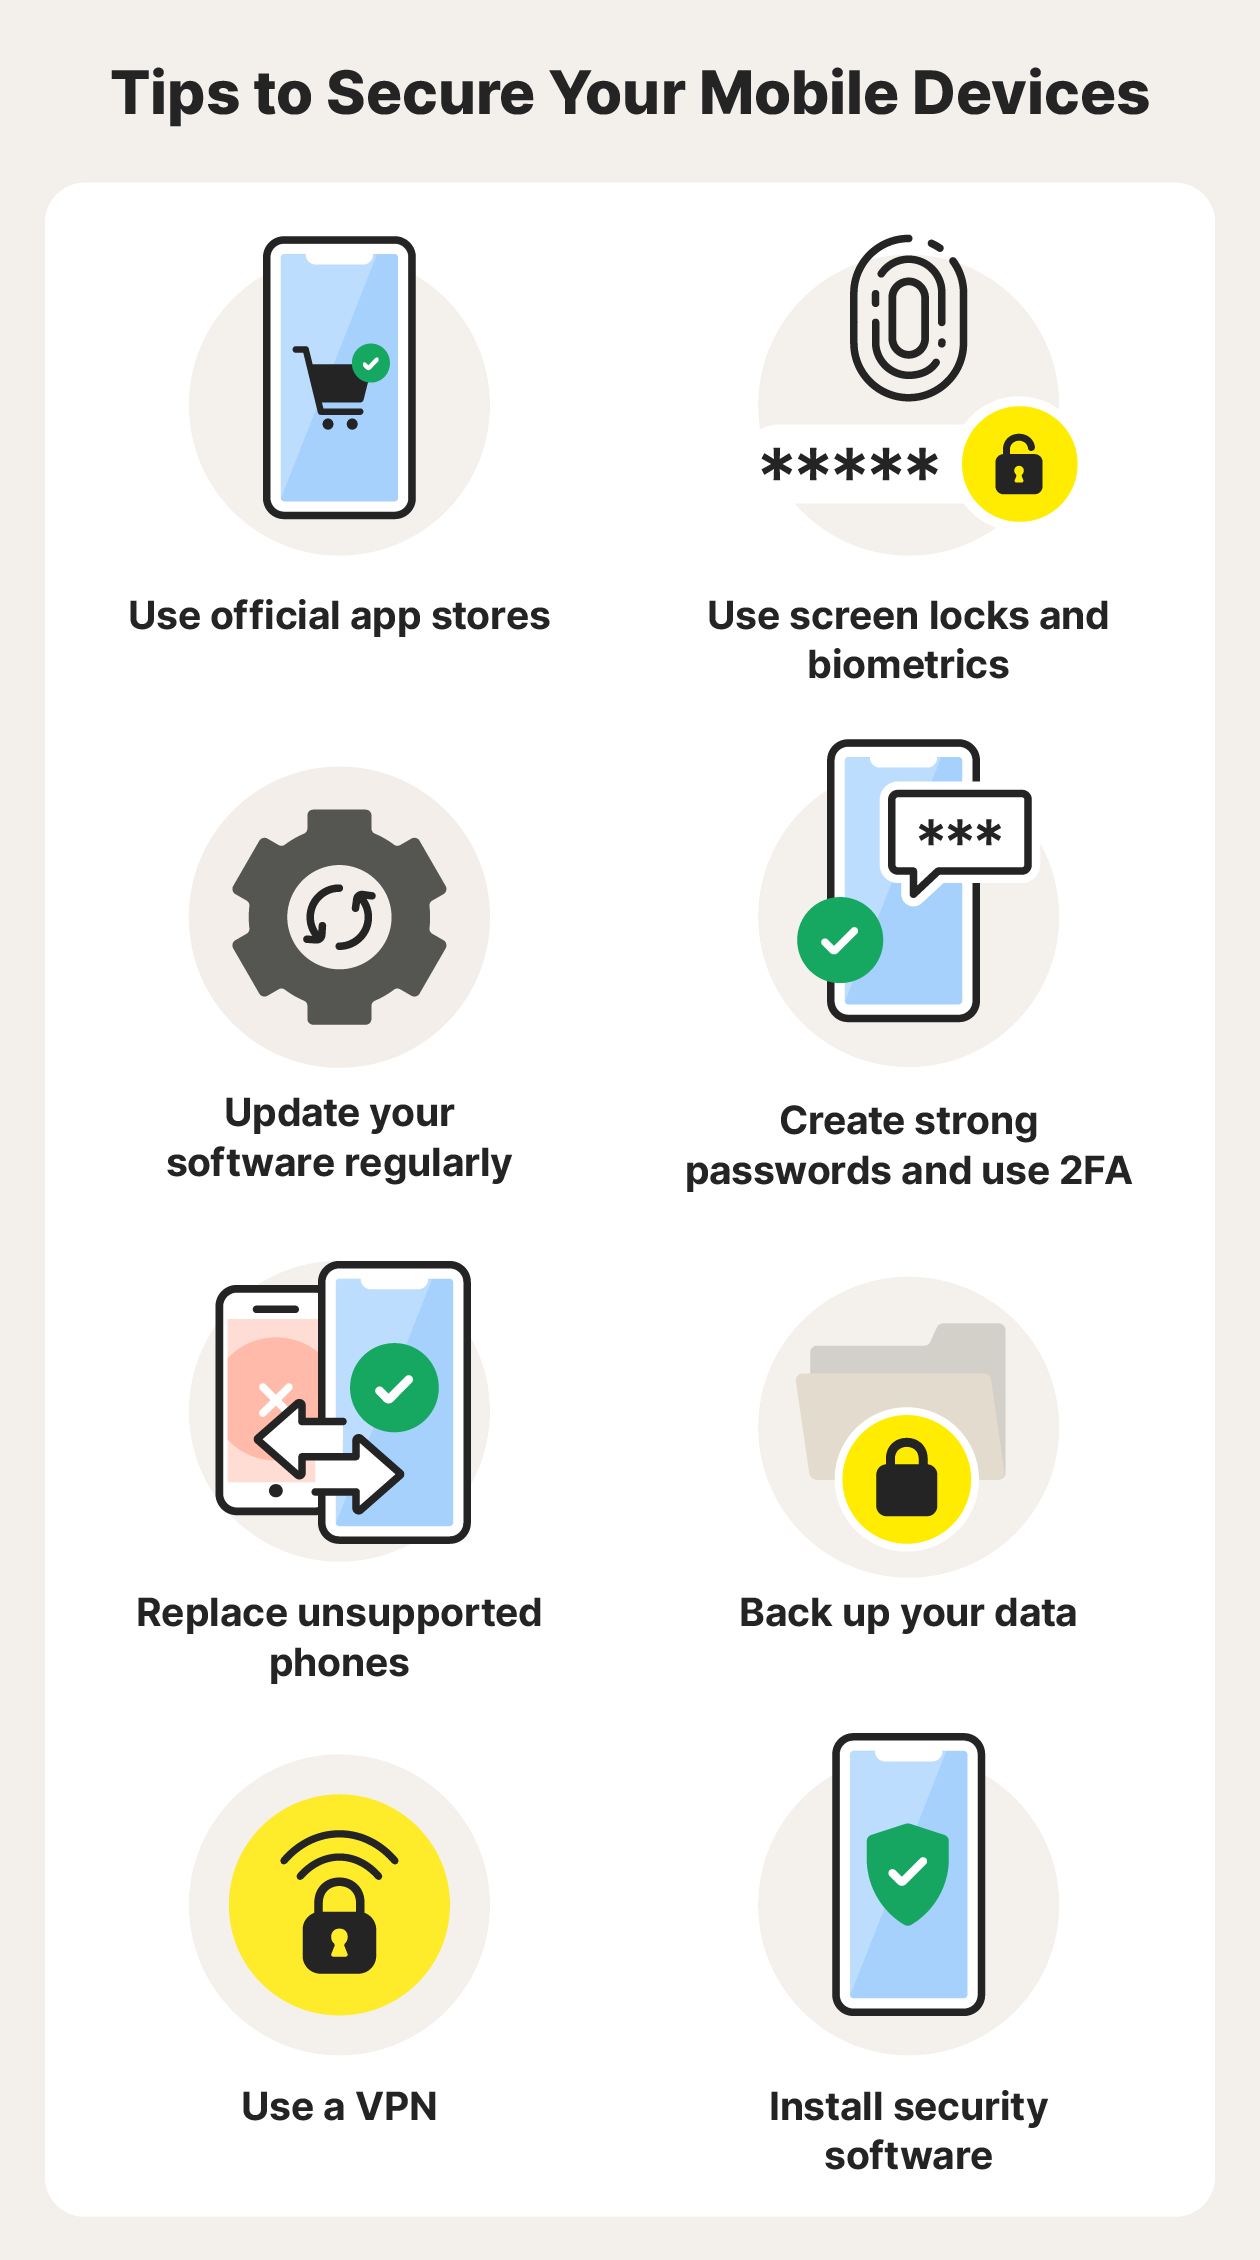 Eight tips to secure mobile devices.